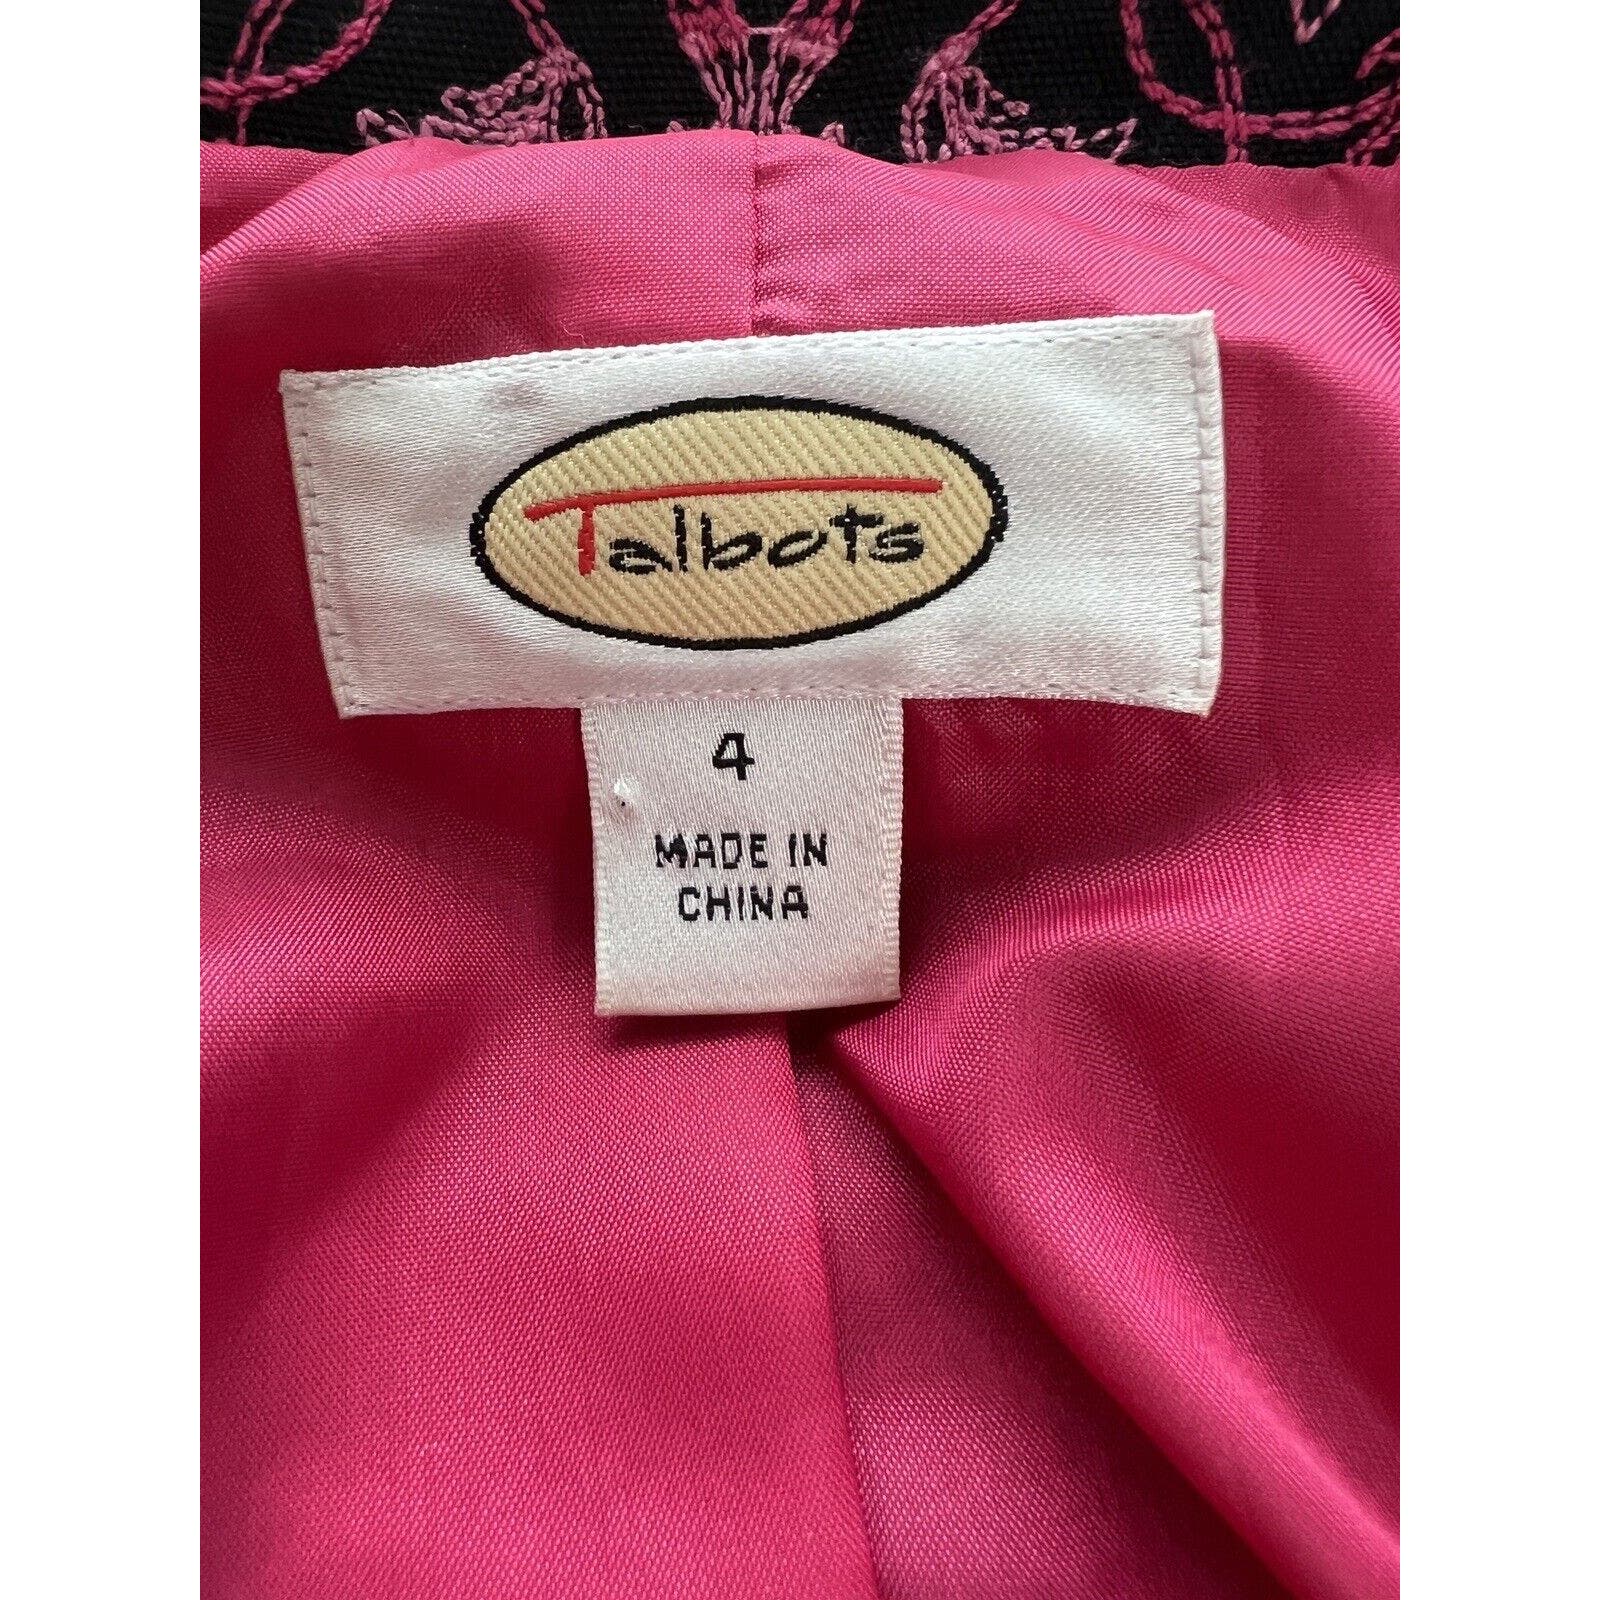 Talbots Blazer Women’s Size 4 Career Jacket Embroidered Lined Black And Pink